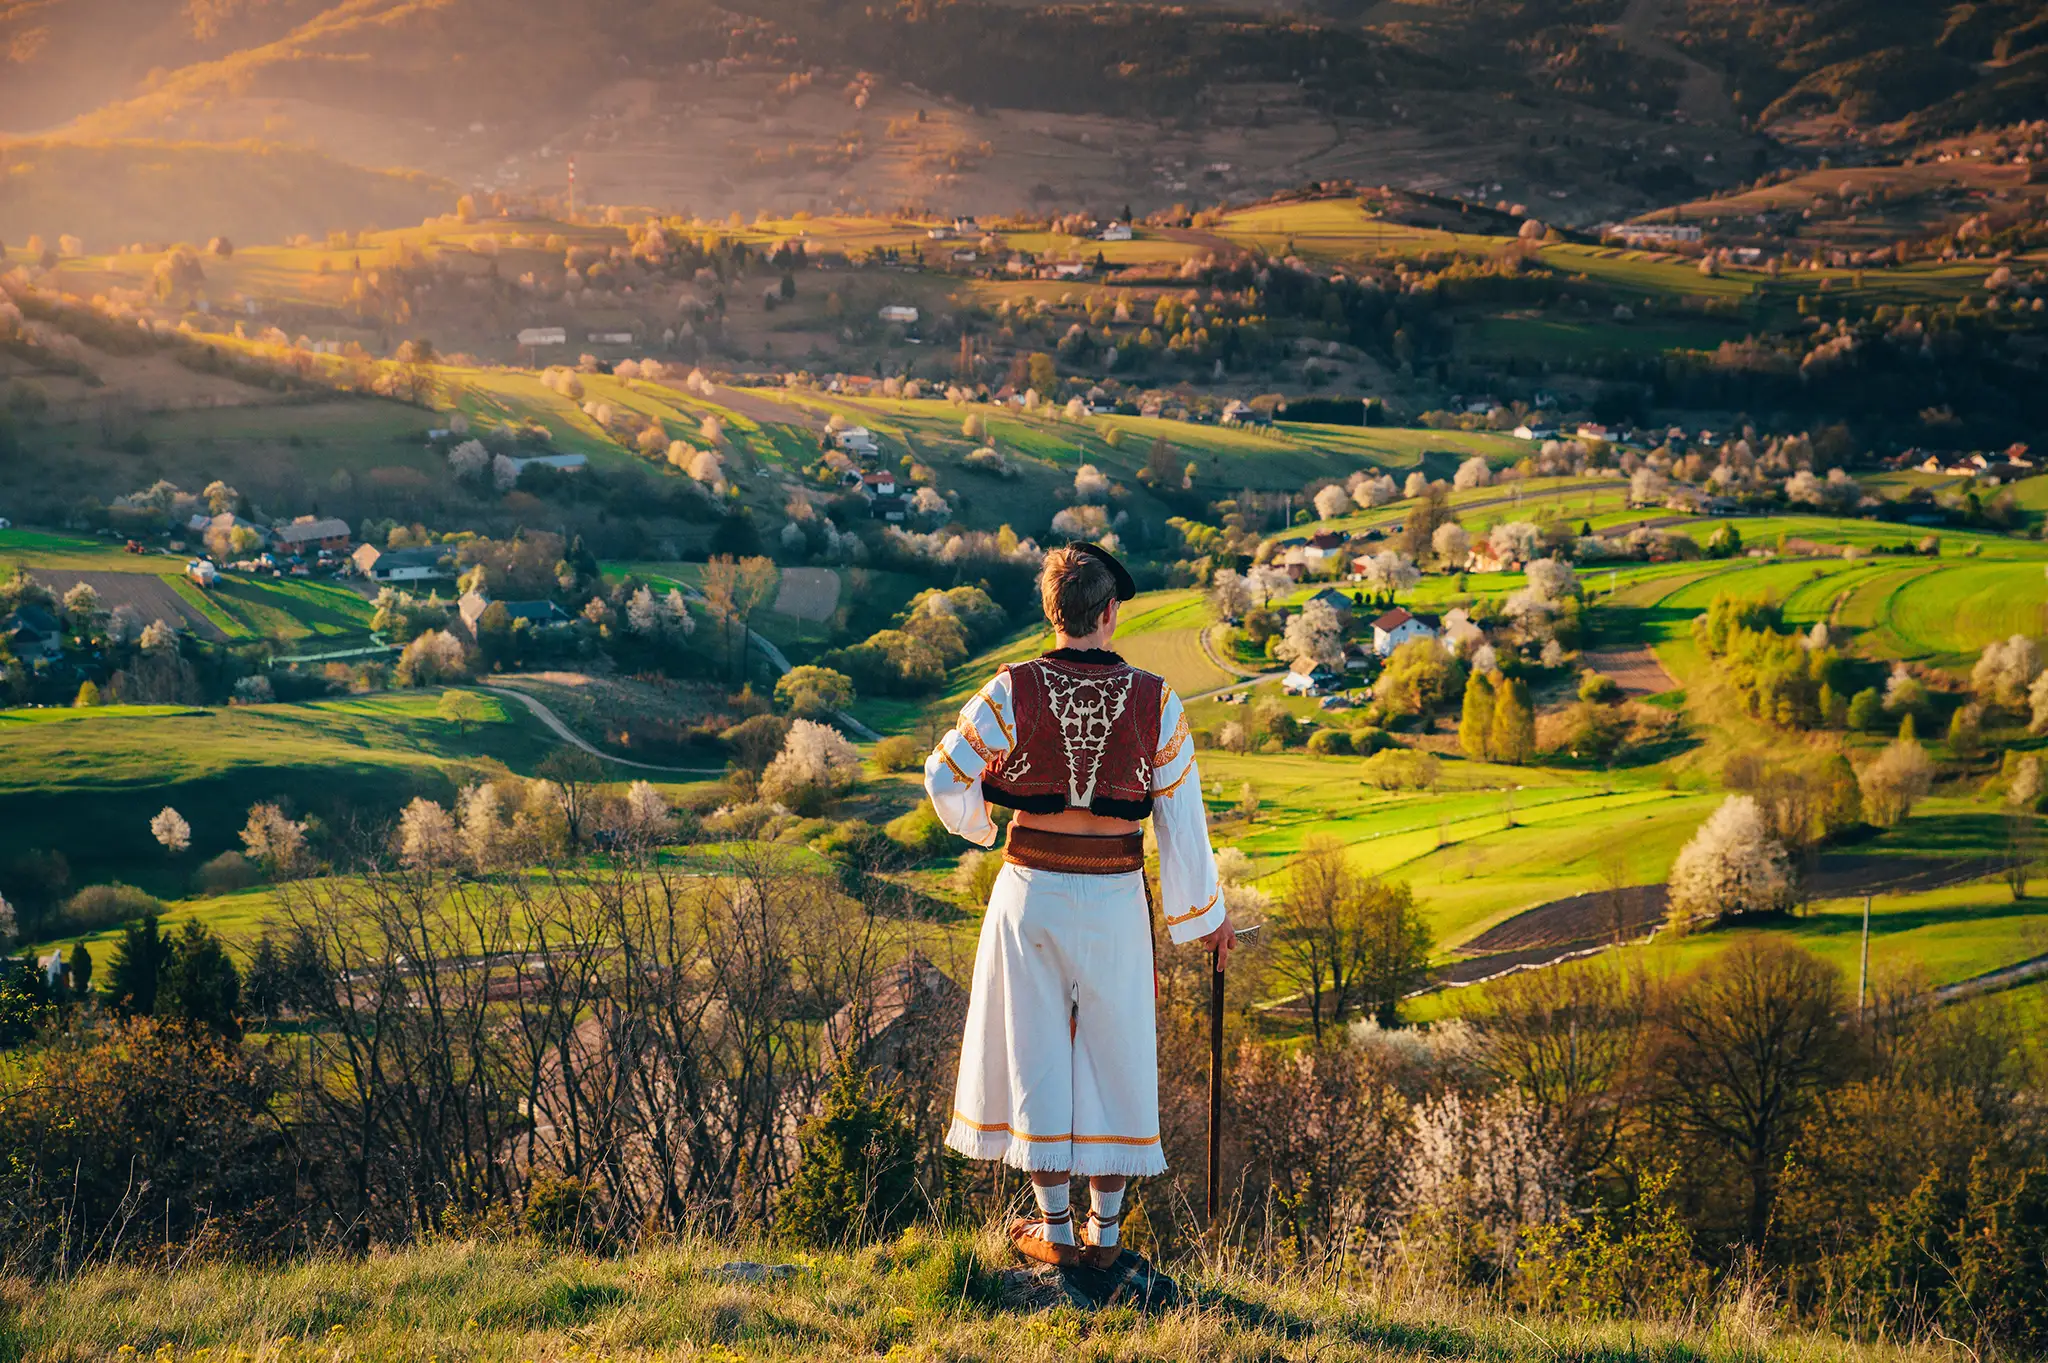 A young man in a Slovak folk costume looks at the spring landscape in the village of Hrinova in Slovakia. Rising sun and spring flowering trees in the background.